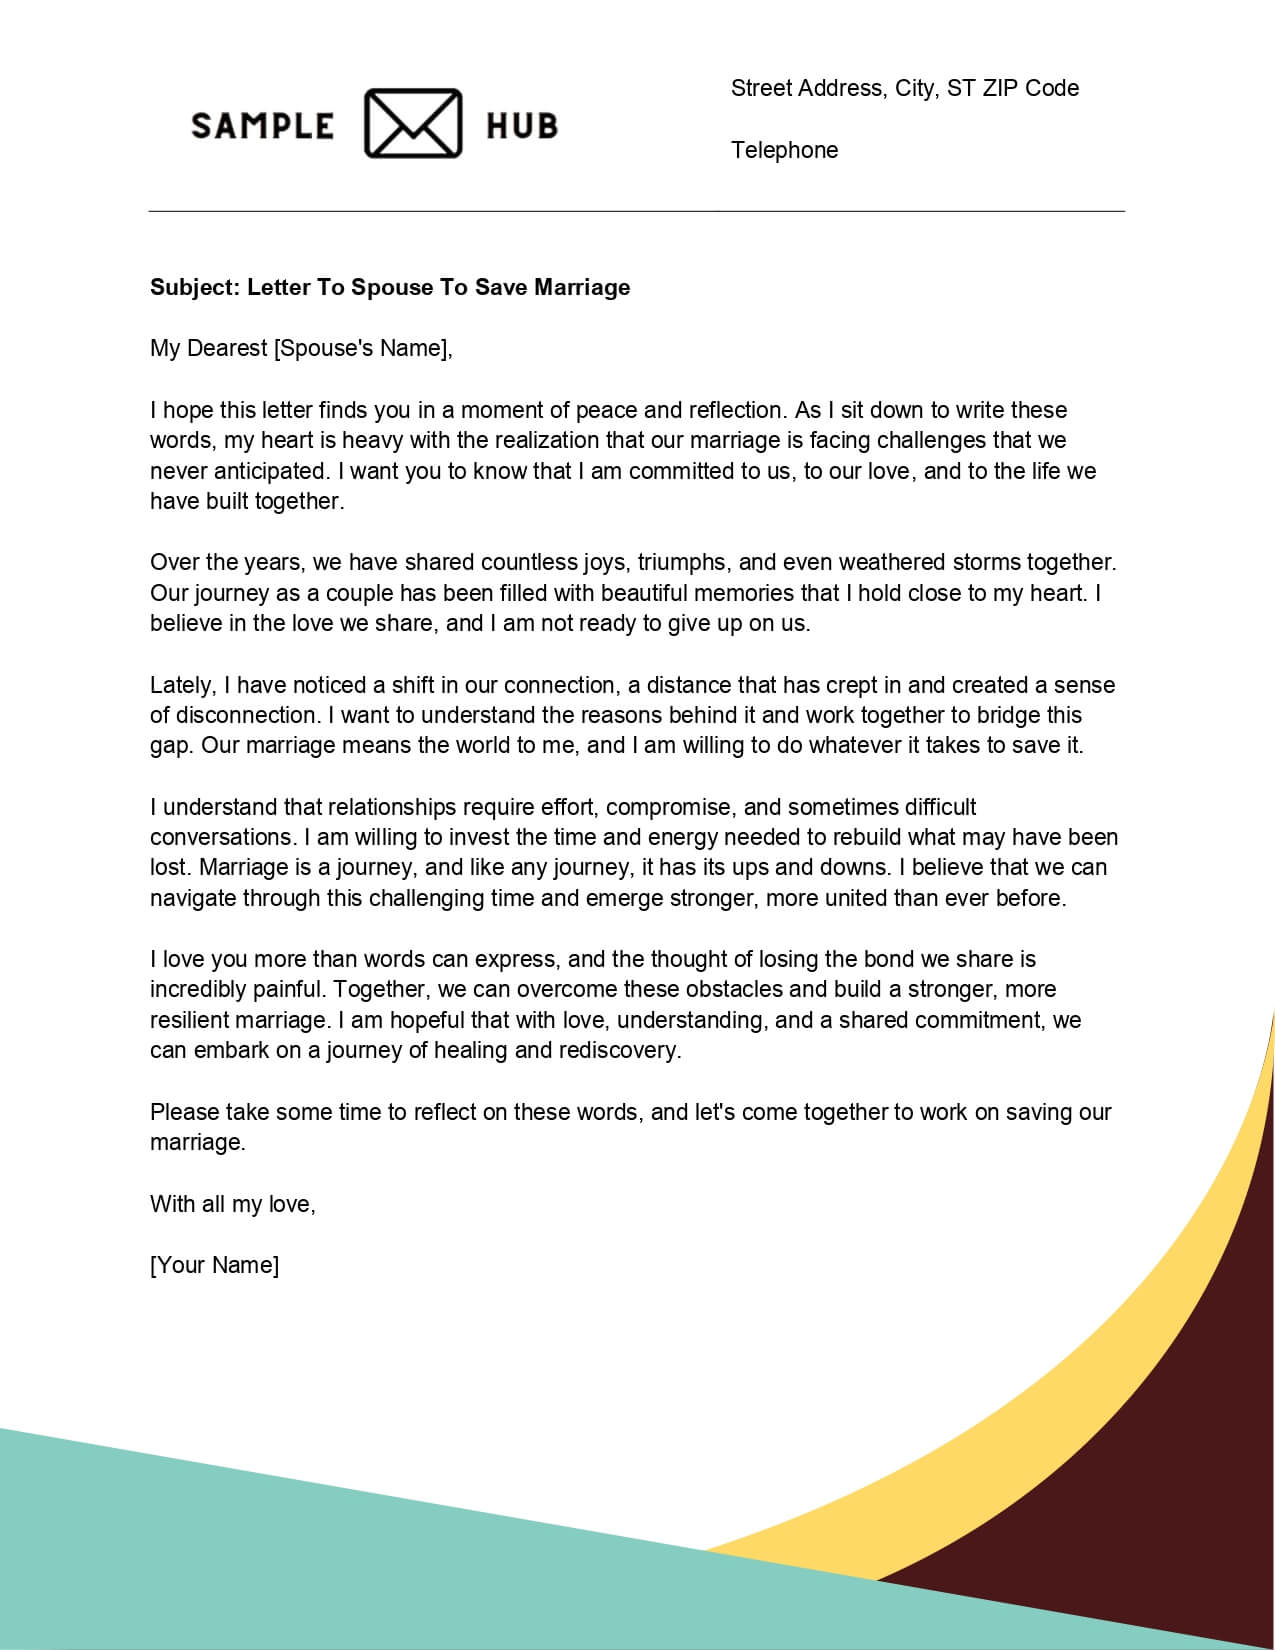 Letter To Spouse To Save Marriage